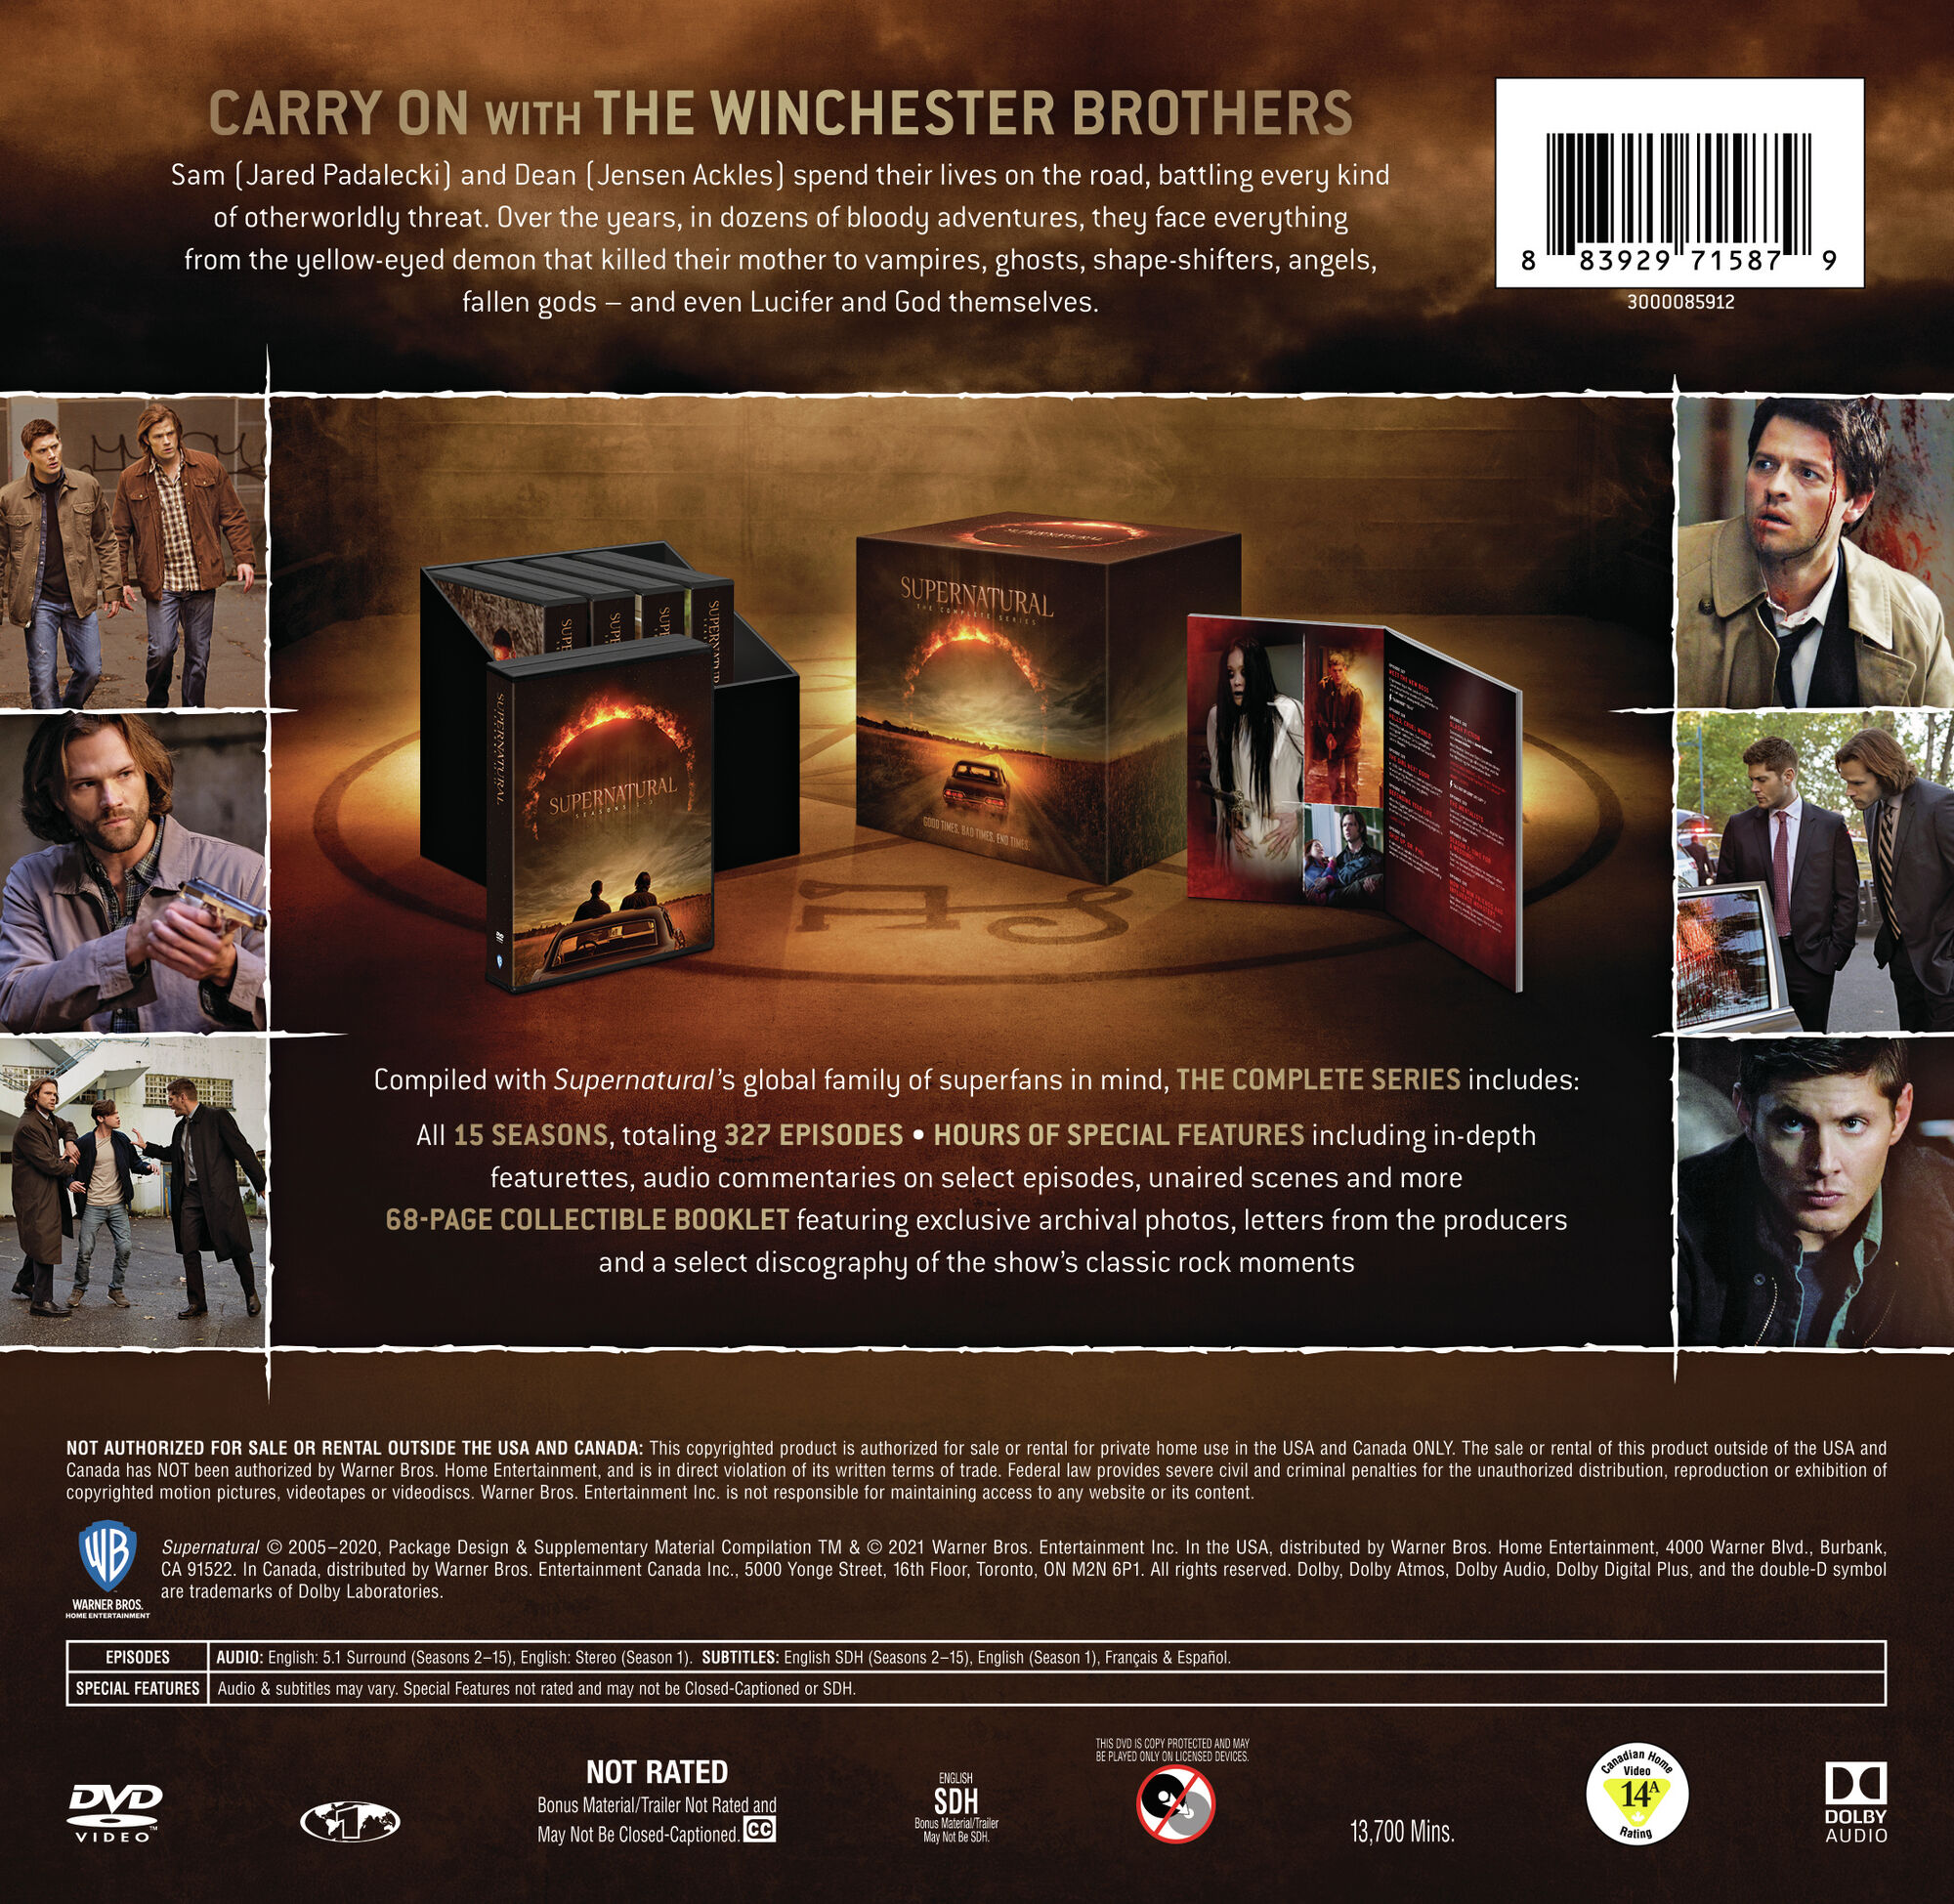 Supernatural: The Complete Series (DVD) - image 2 of 3